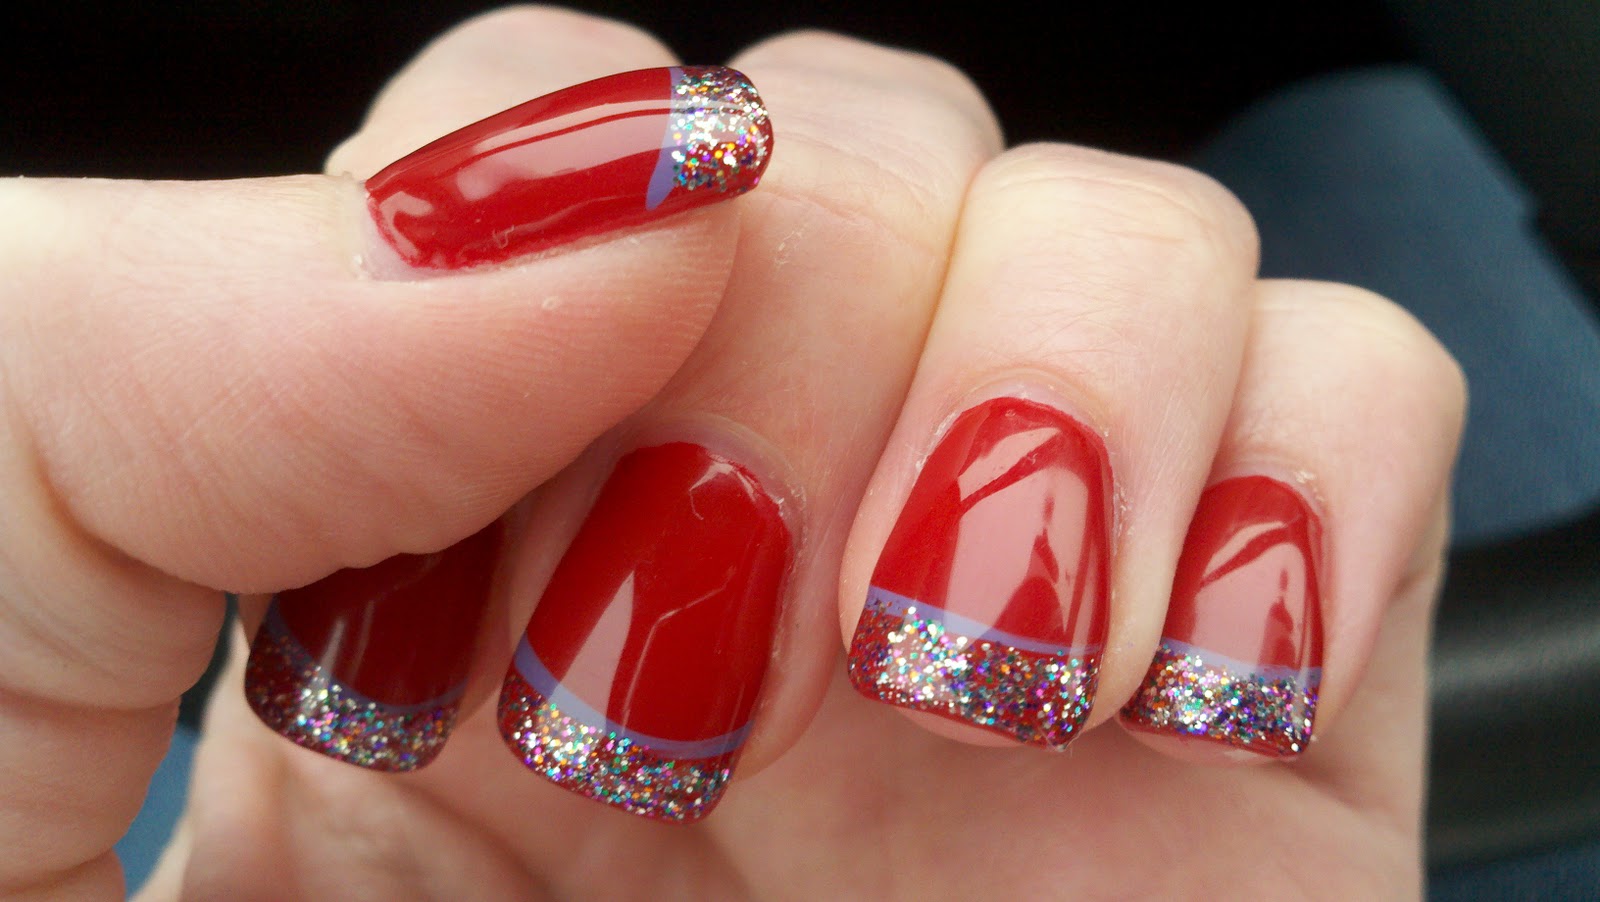 4. "Cute and Creative Christmas Nail Art Ideas to Try This Year" - wide 7